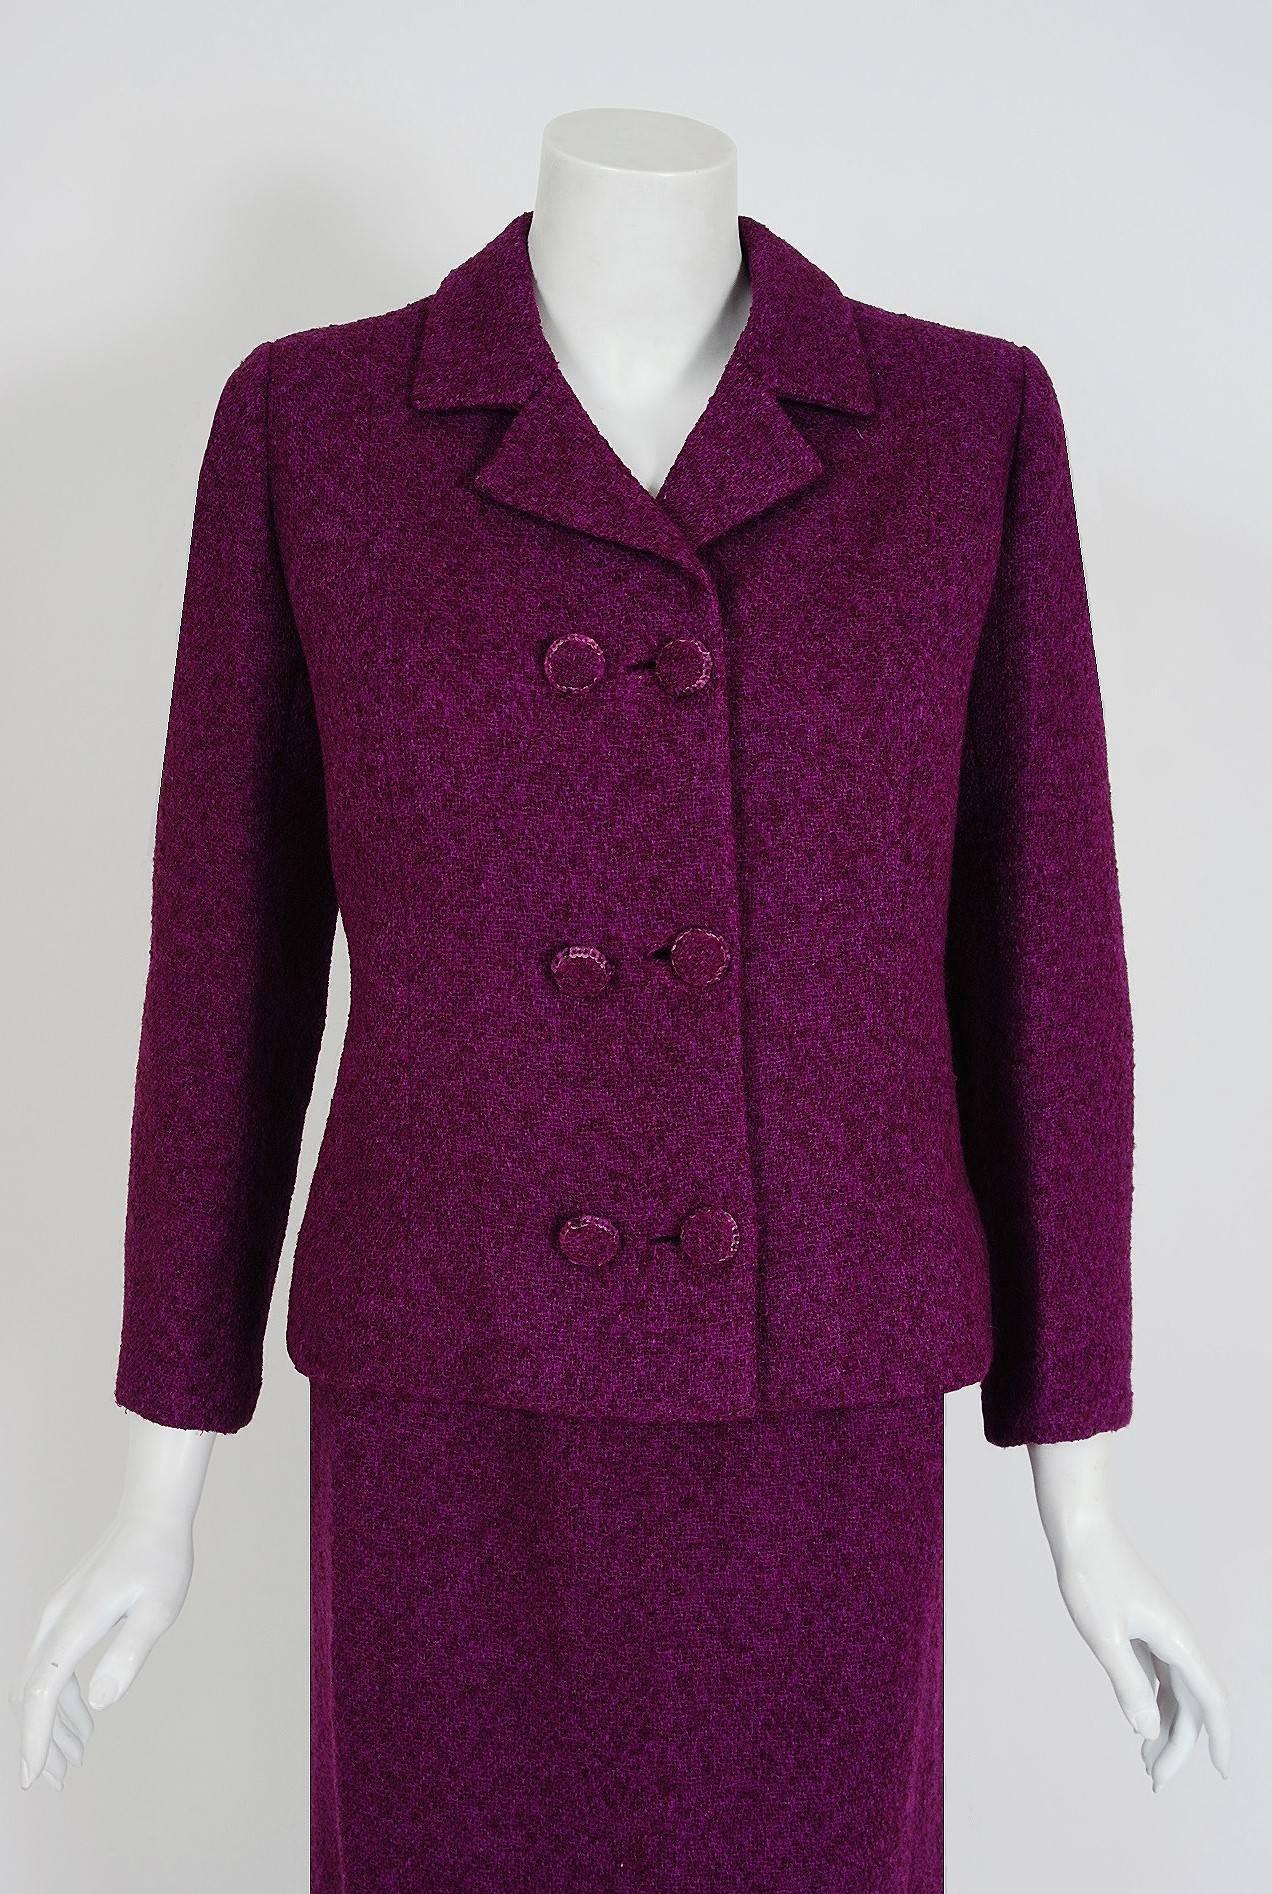 Stunning Balenciaga vibrant royal-purple textured wool skirt suit from his 1967 Fall/Winter collection. Cristobal Balenciaga began his life's work in fashion at a very young age. It is fabled that the Marquesa de Casa Torres, who was so taken with